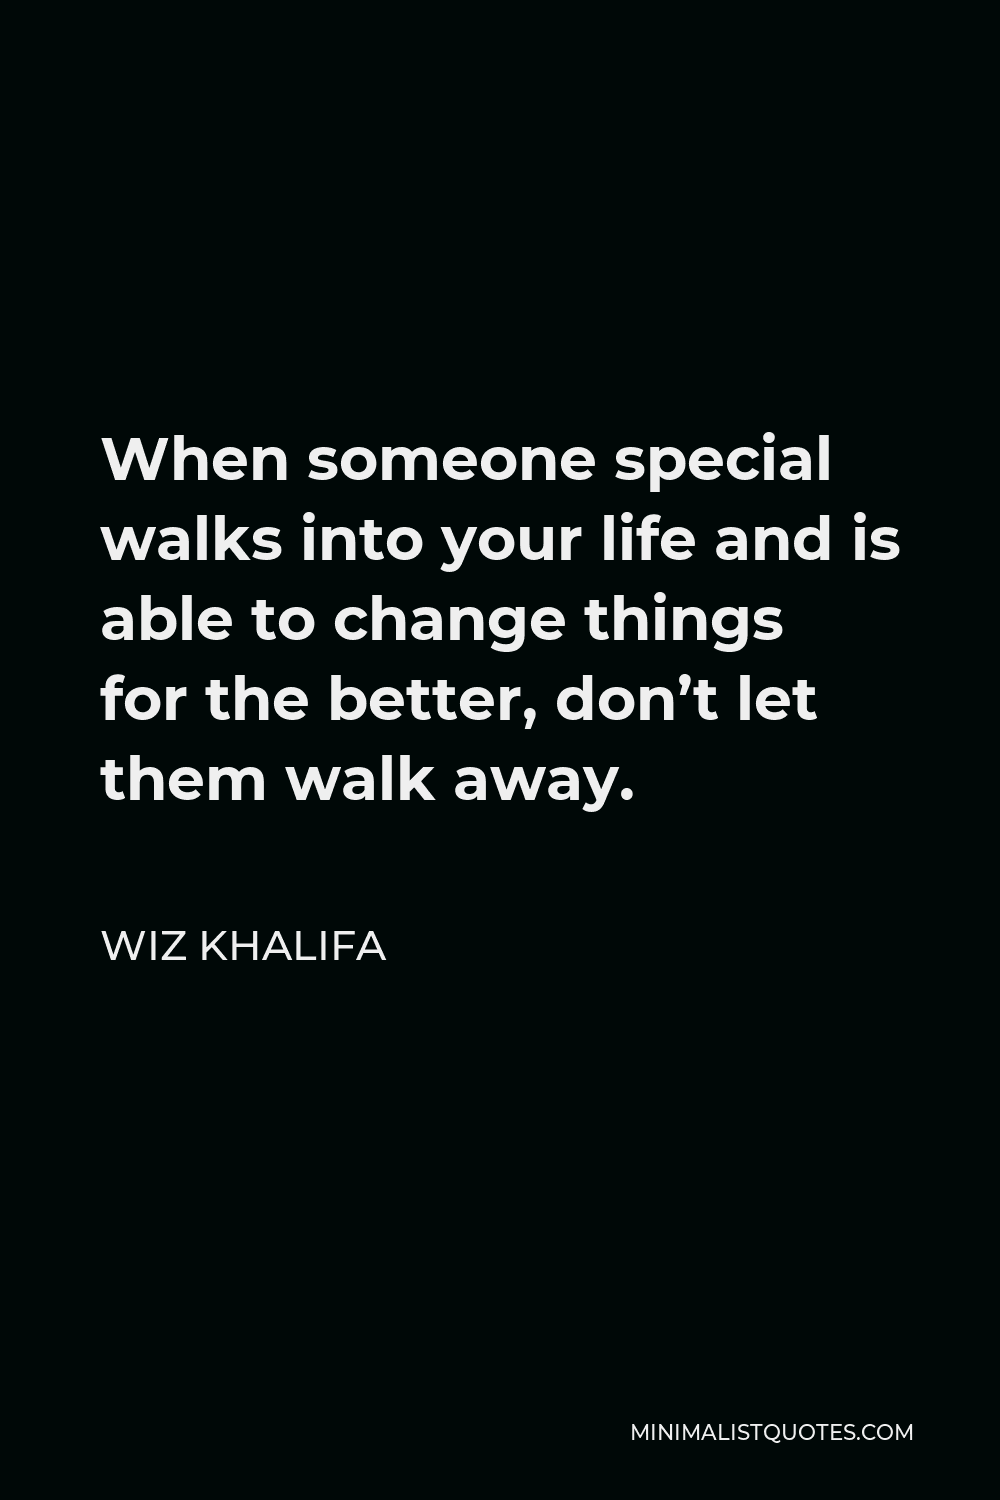 Wiz Khalifa Quote - When someone special walks into your life and is able to change things for the better, don’t let them walk away.